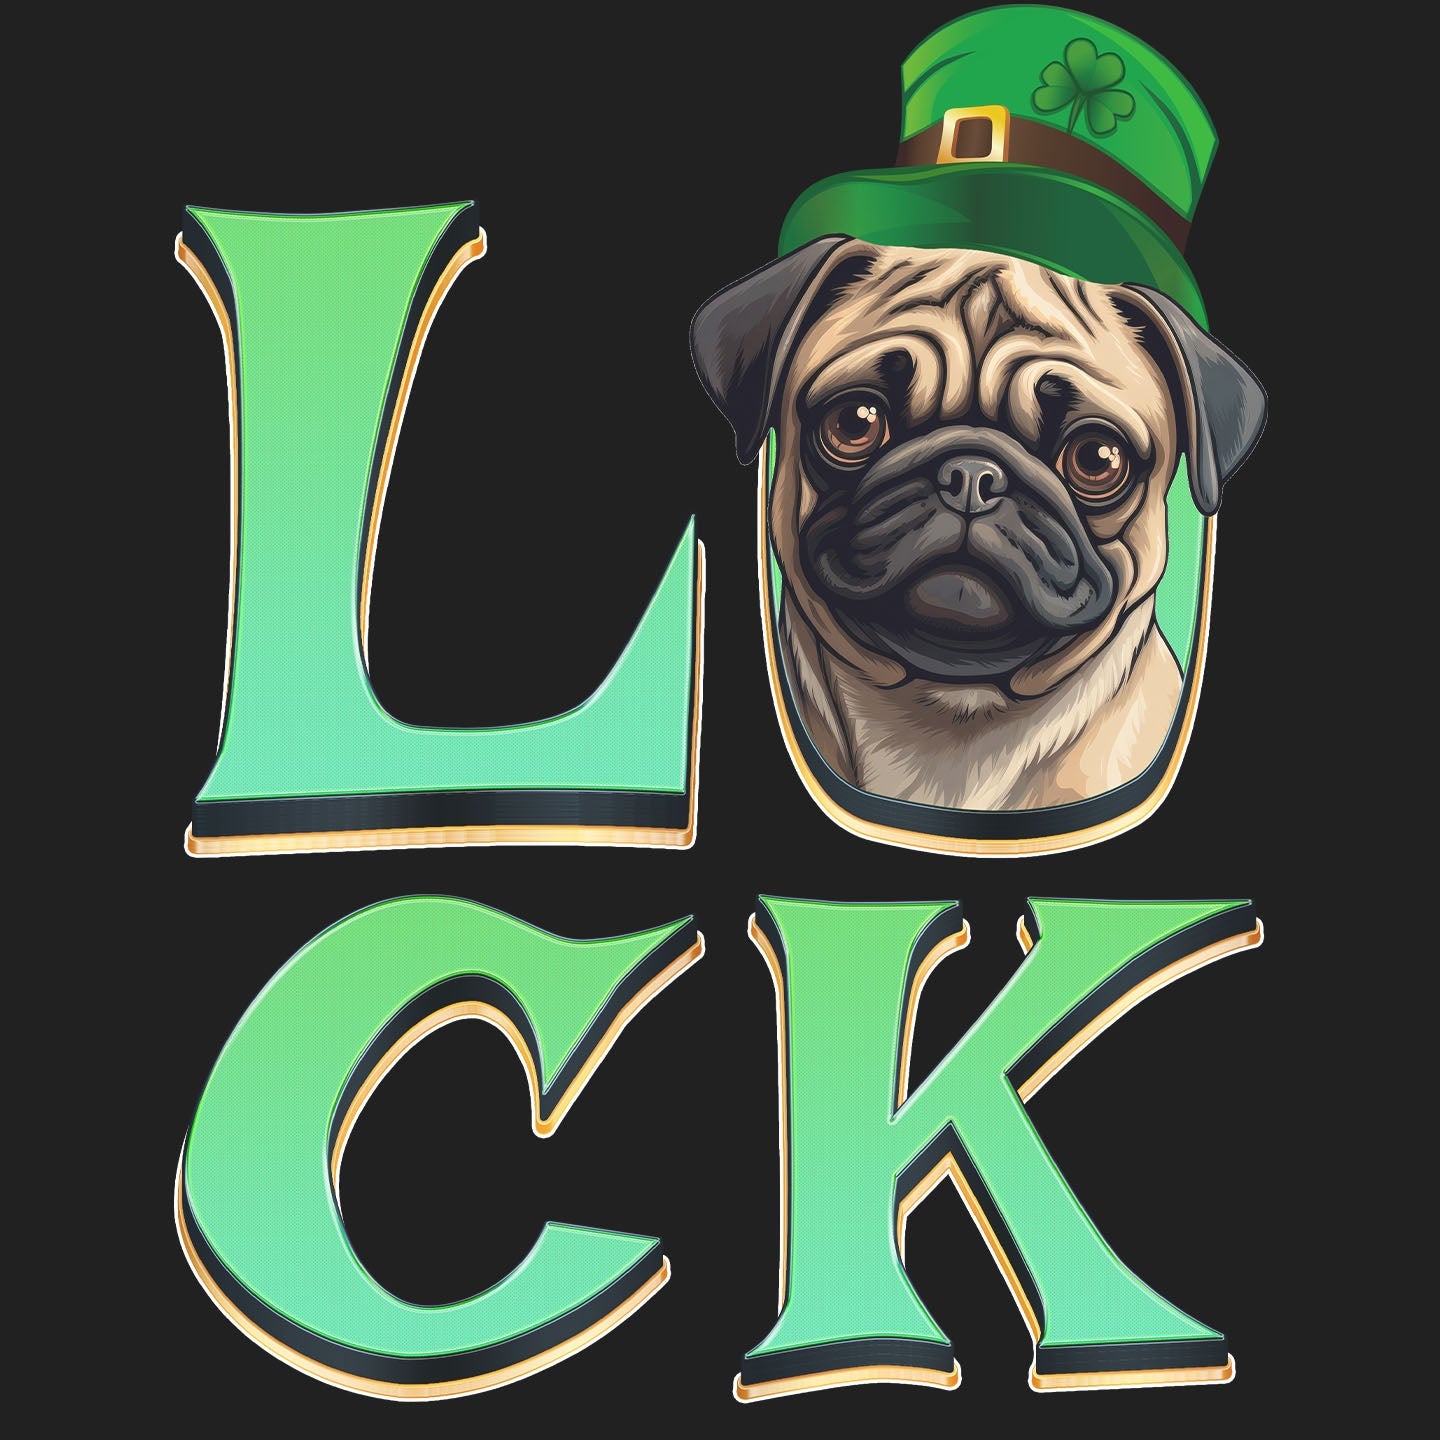 Big LUCK St. Patrick's Day Pug - Women's Fitted T-Shirt